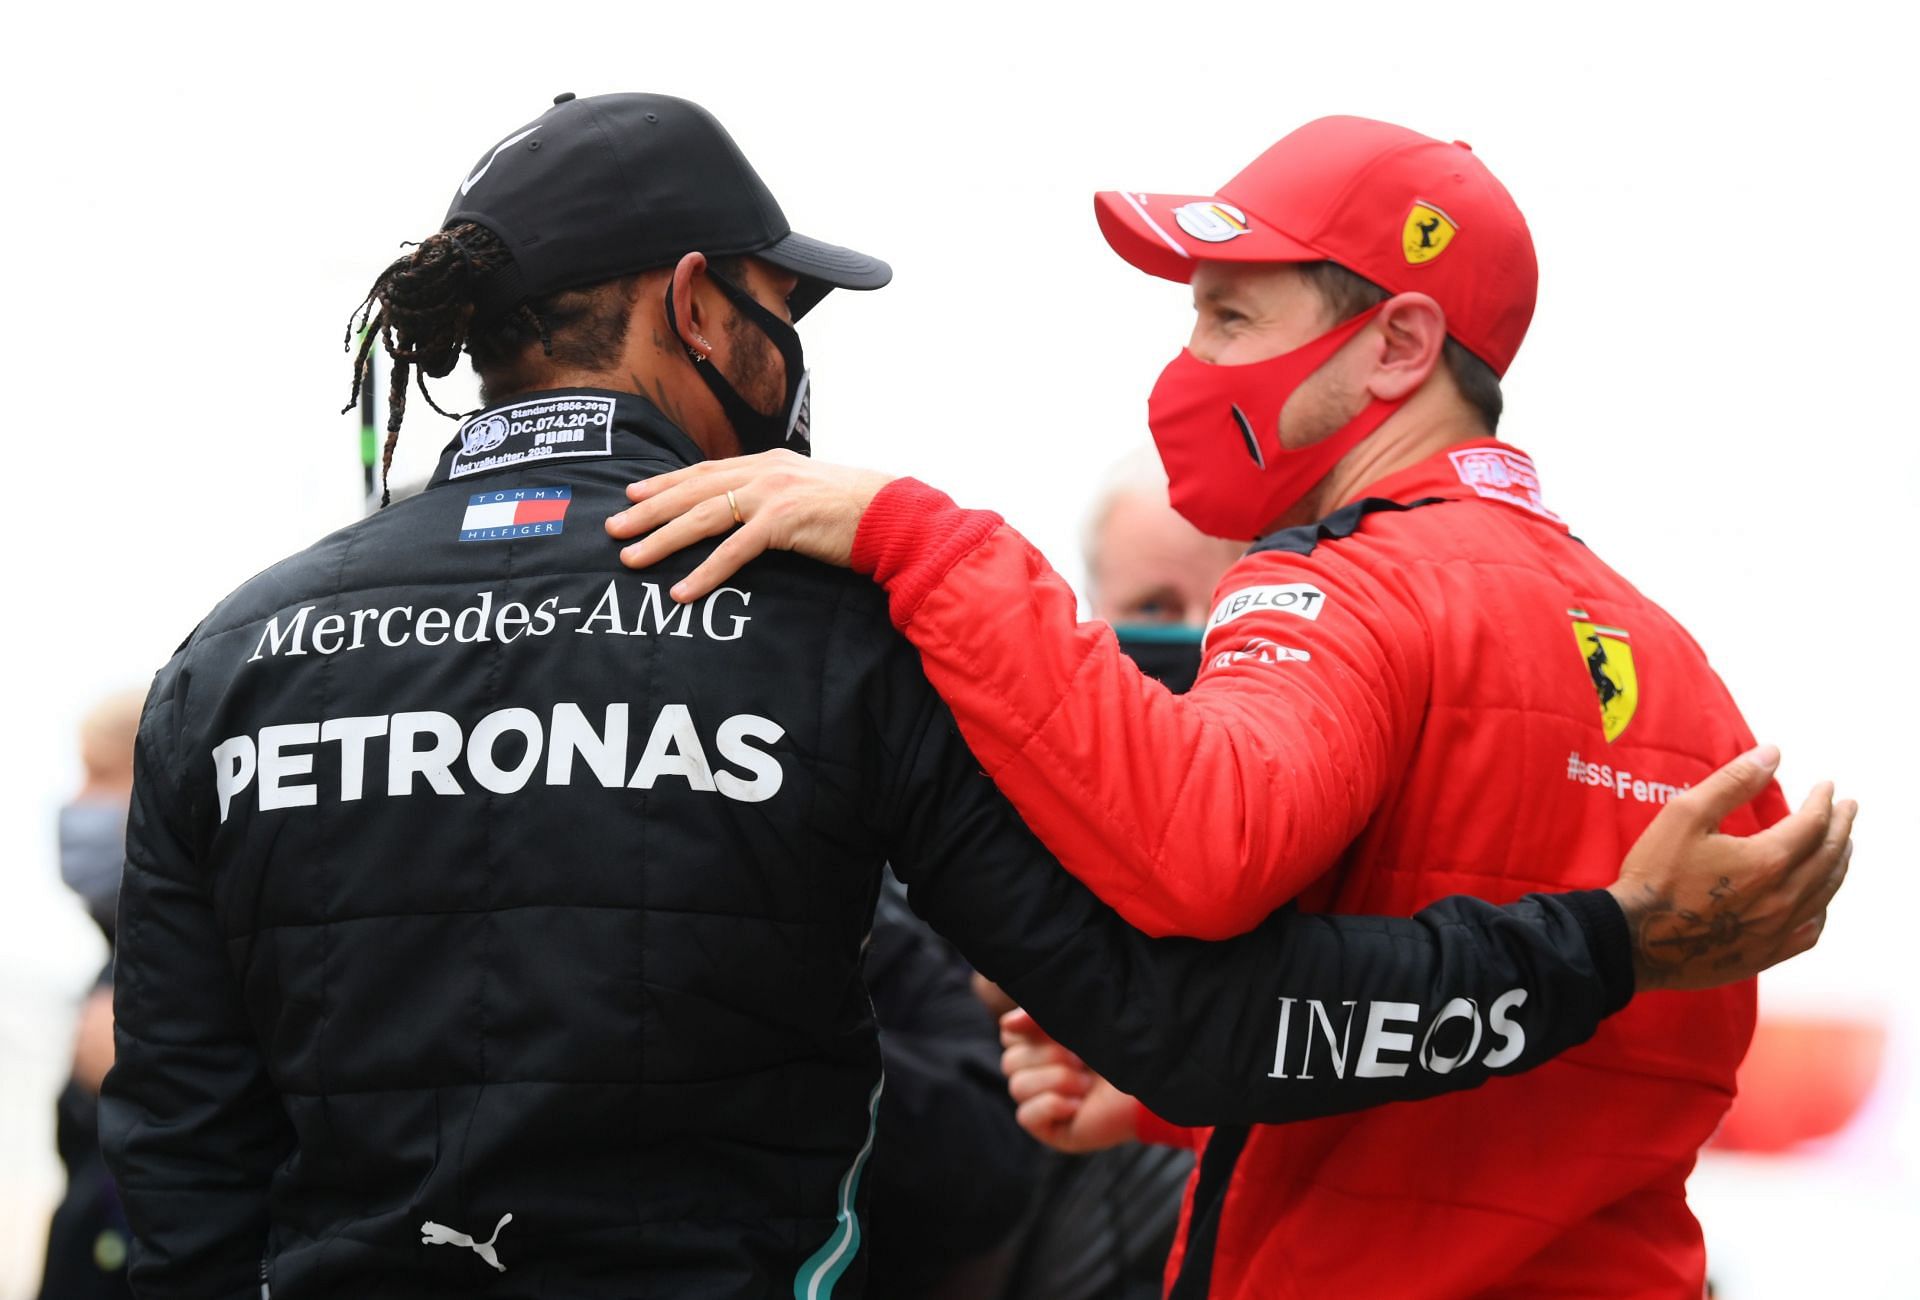 Lewis Hamilton (left) and Sebastian Vettel (right) during the 2020 Turkish Grand Prix (Photo by Clive Mason/Getty Images)